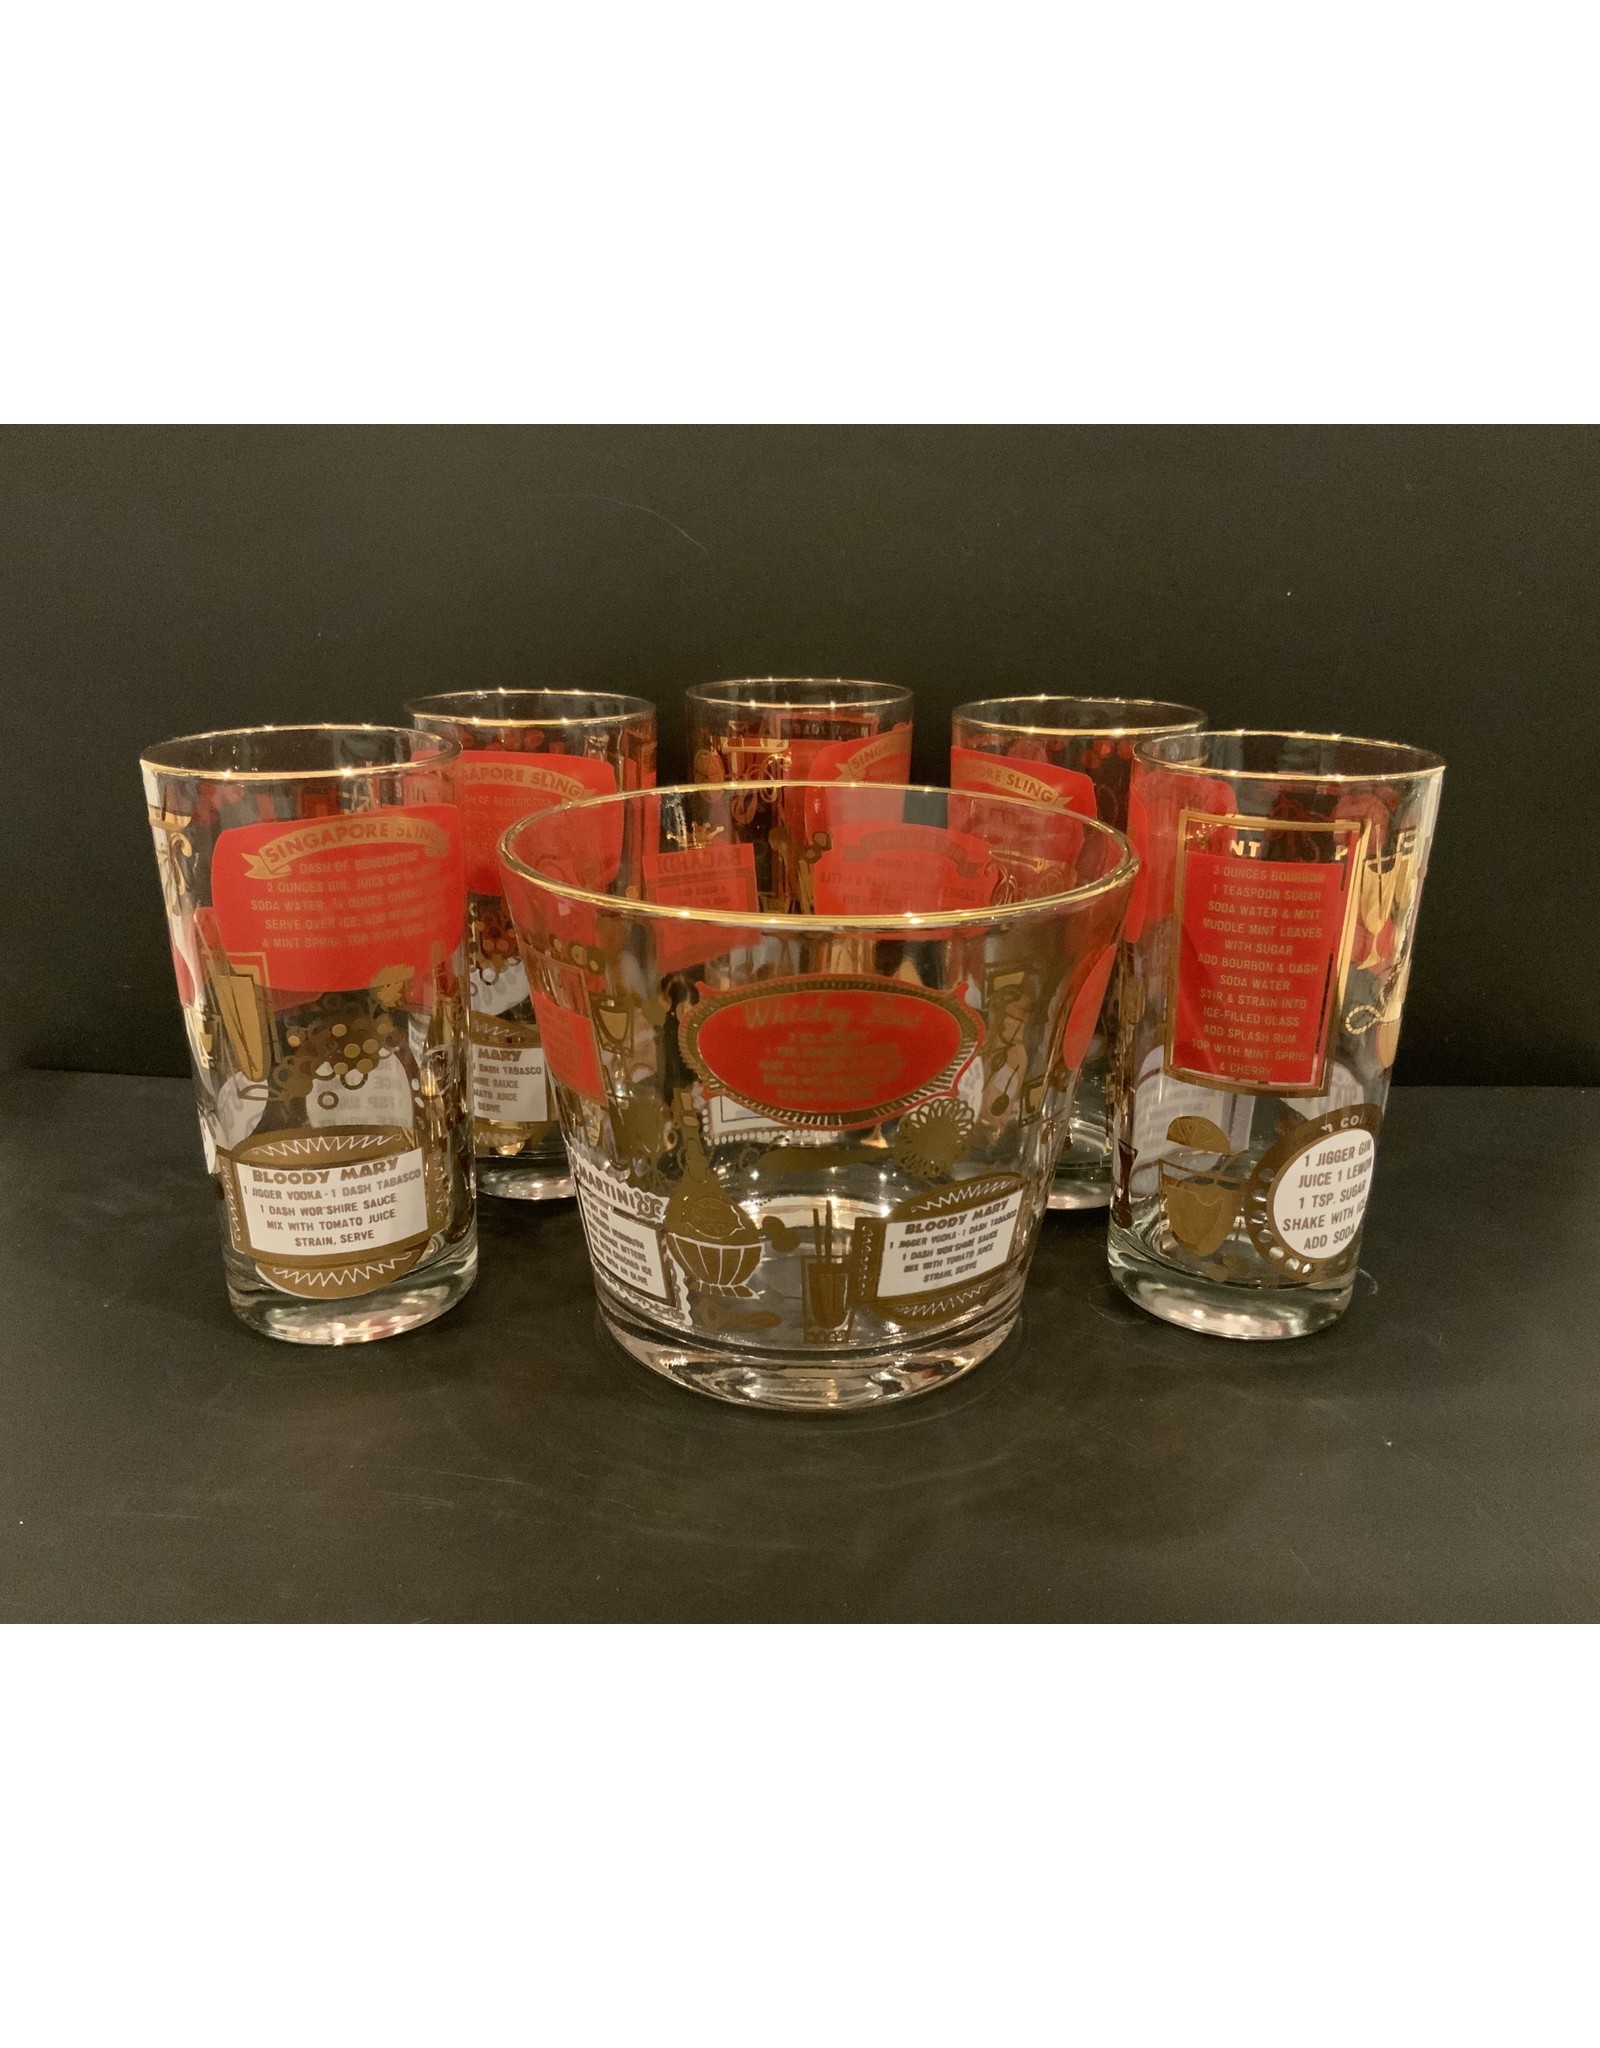 SPV Mid Century Modern Ice Bucket and set of 5 Glasses with Cocktail Recipes on them